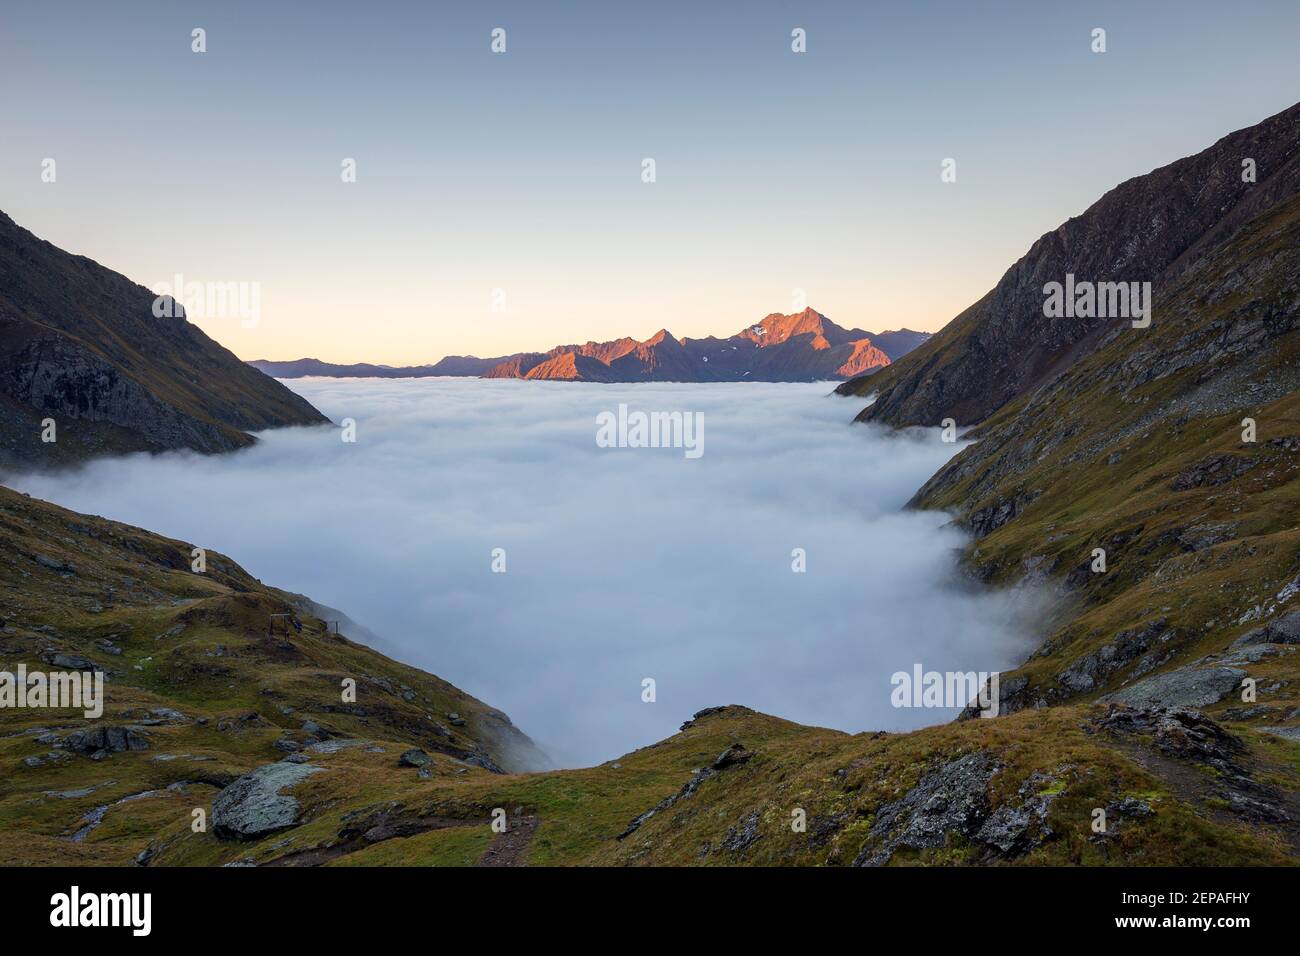 At sunrise, view on Timmeltal valley, in background Lasörling peaks. Tide of clouds. Austrian Alps. Europe. Stock Photo